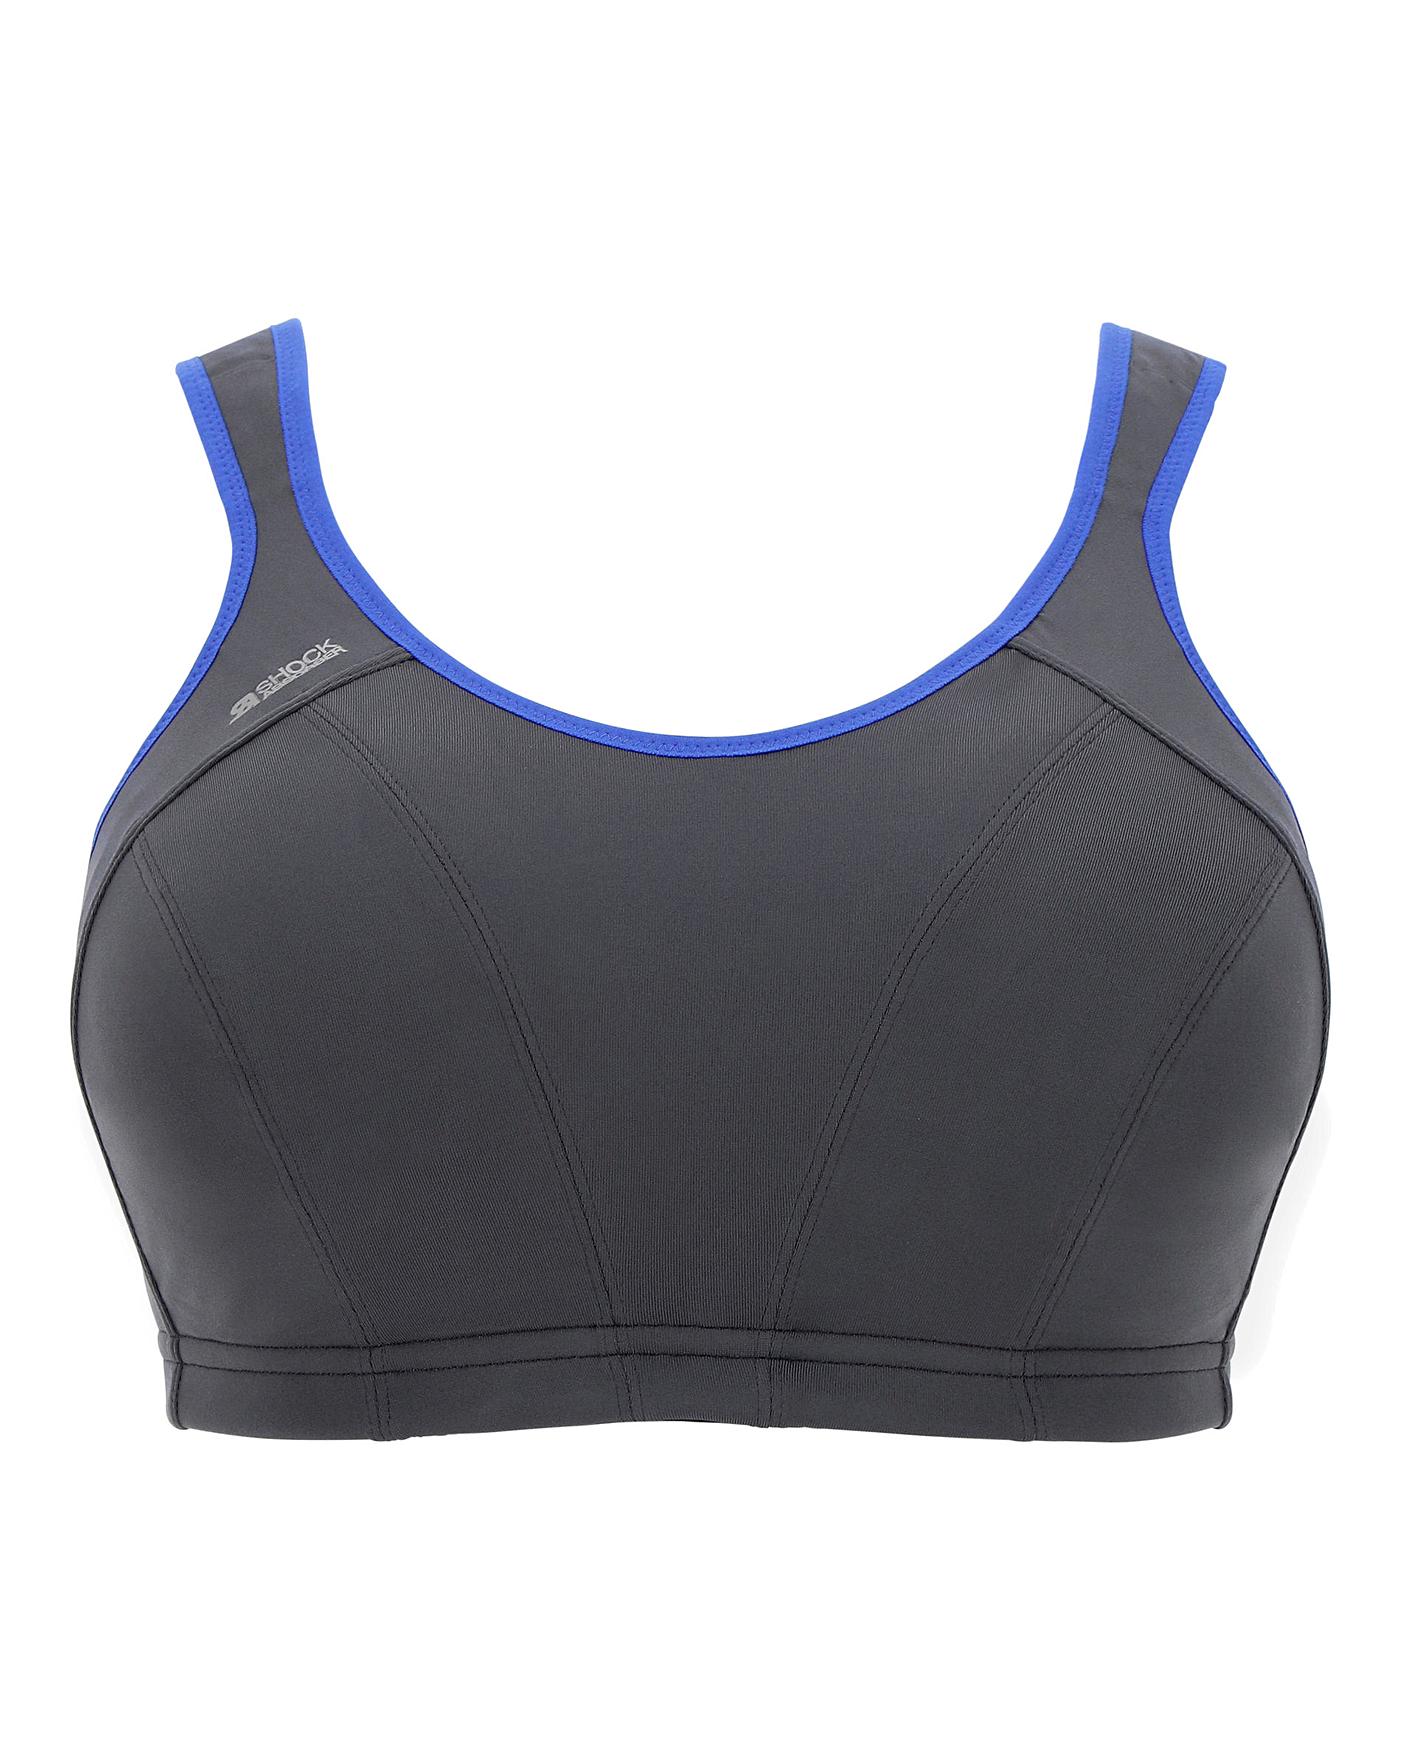 Women's Sports Bras, High Impact, Padded & Underwired, JD Williams